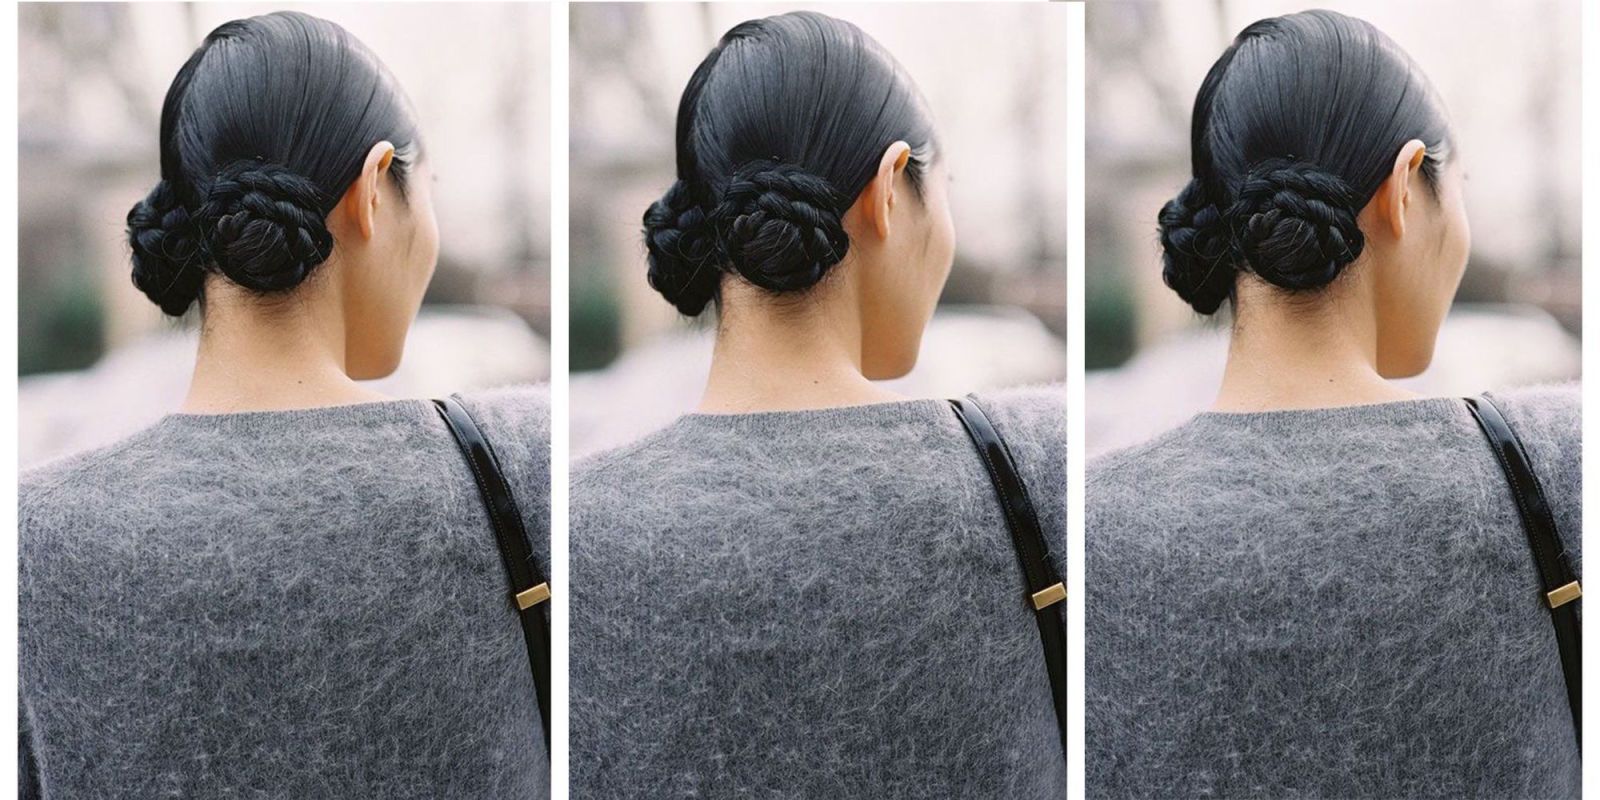 20 Photos That Prove Double Bun Hairstyles Can Be Sophisticated - Cultura  Colectiva | Braided bun hairstyles, Bun hairstyles, Short hair updo